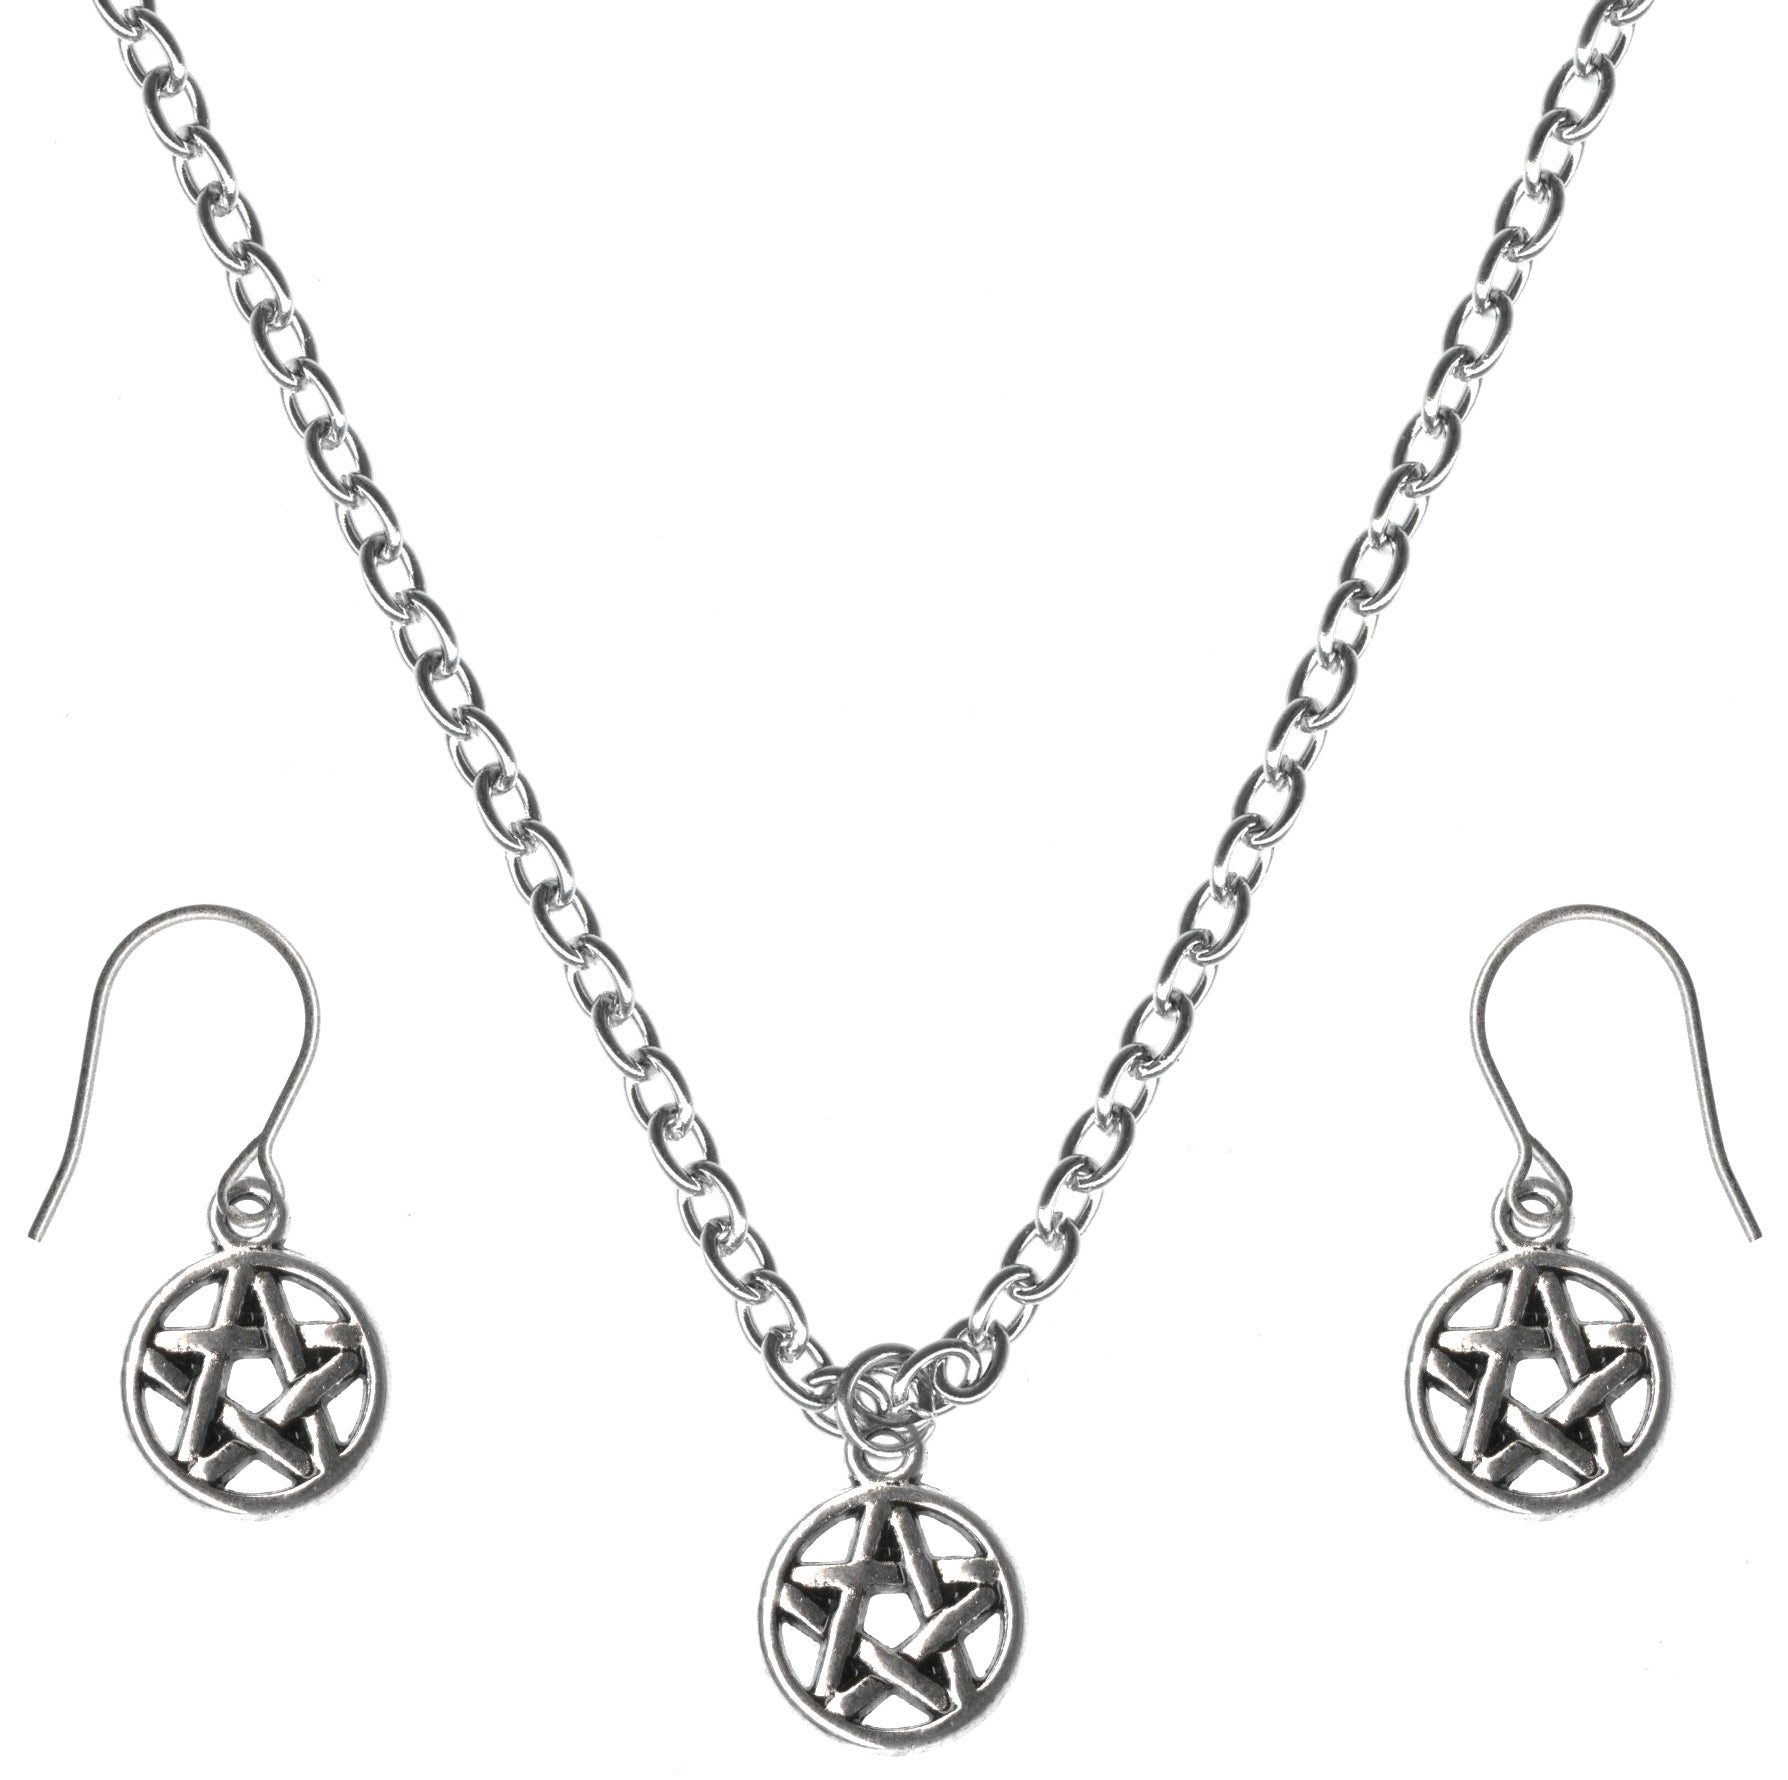 Mini Pentacle Charm Steel Chain Necklace and Hypoallergenic Titanium Earrings Set